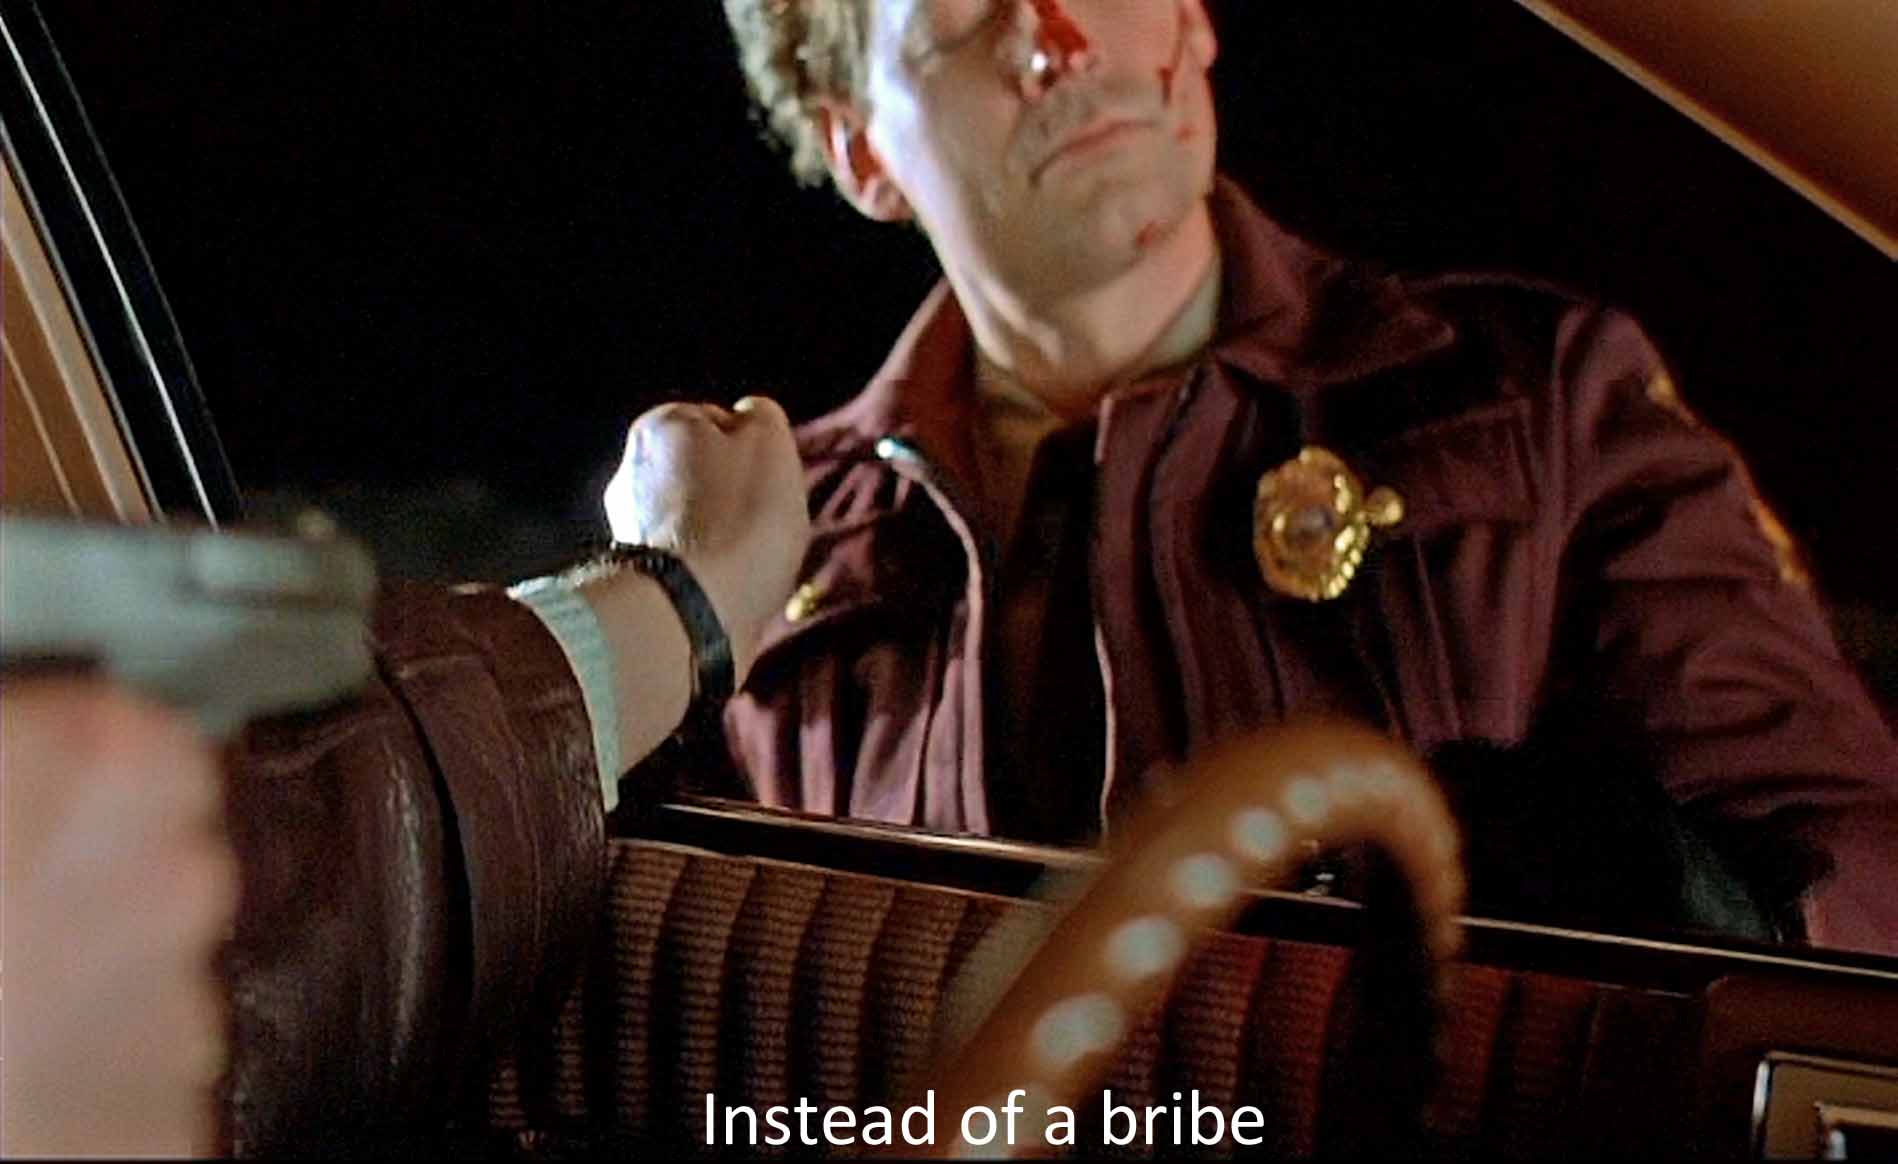 Instead of a bribe